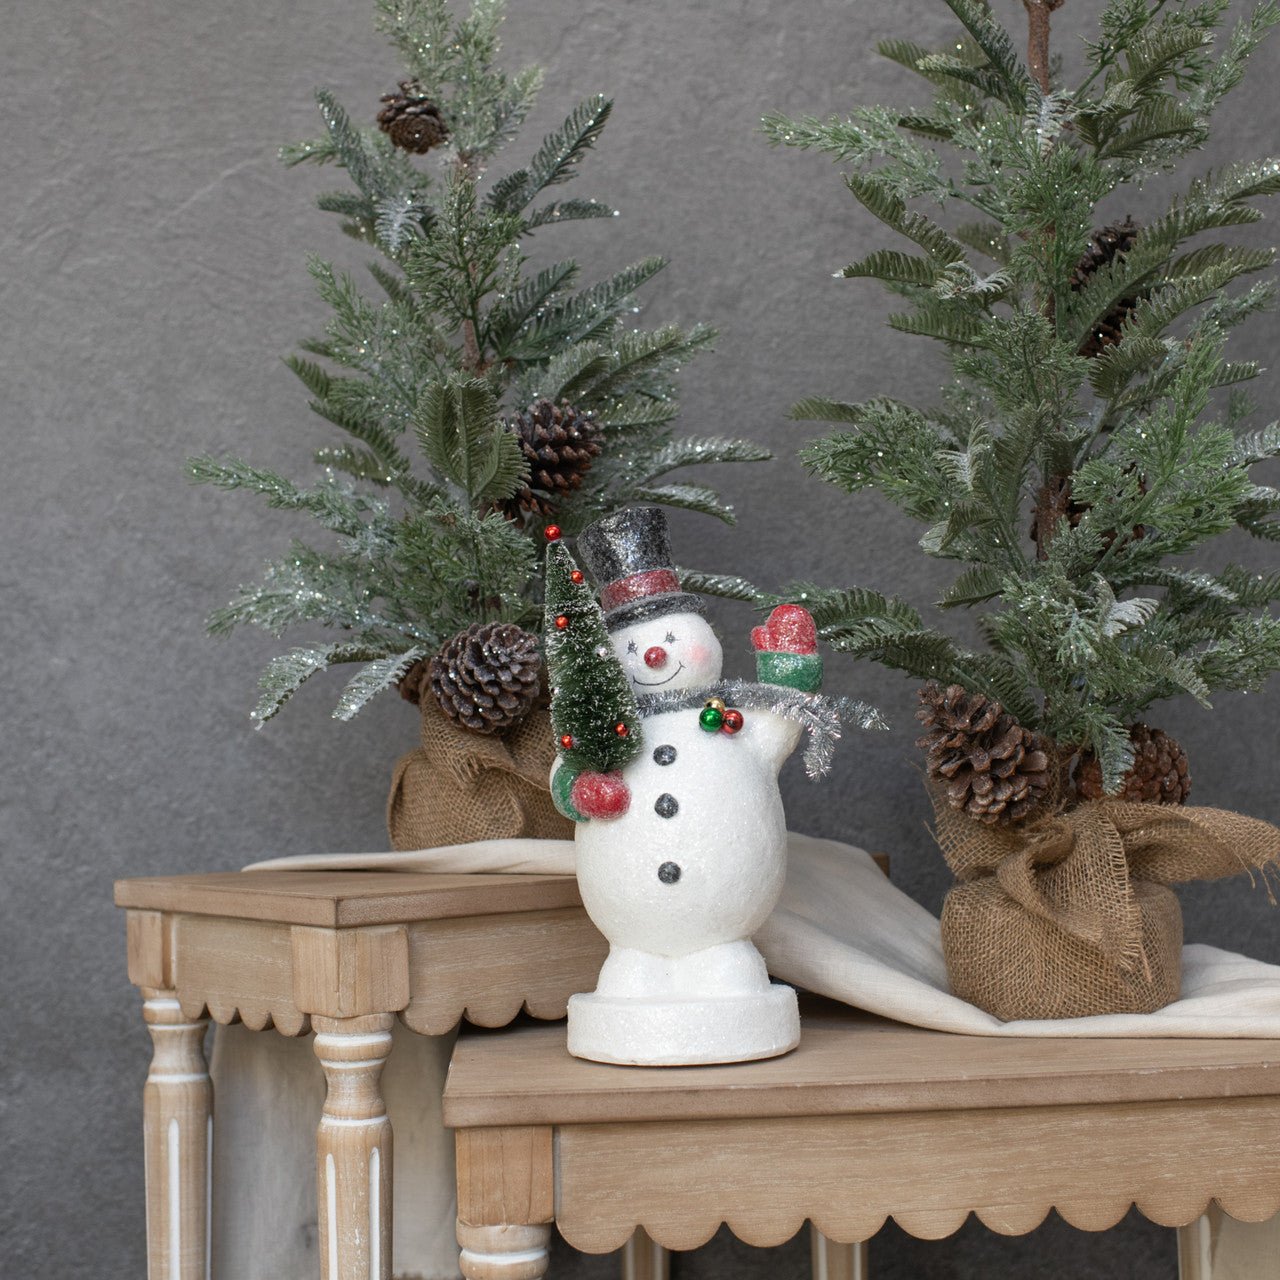 Ragon House 12” Snowman Figurine w/Bottle Brush Tree Tinsel - The Primitive Pineapple Collection